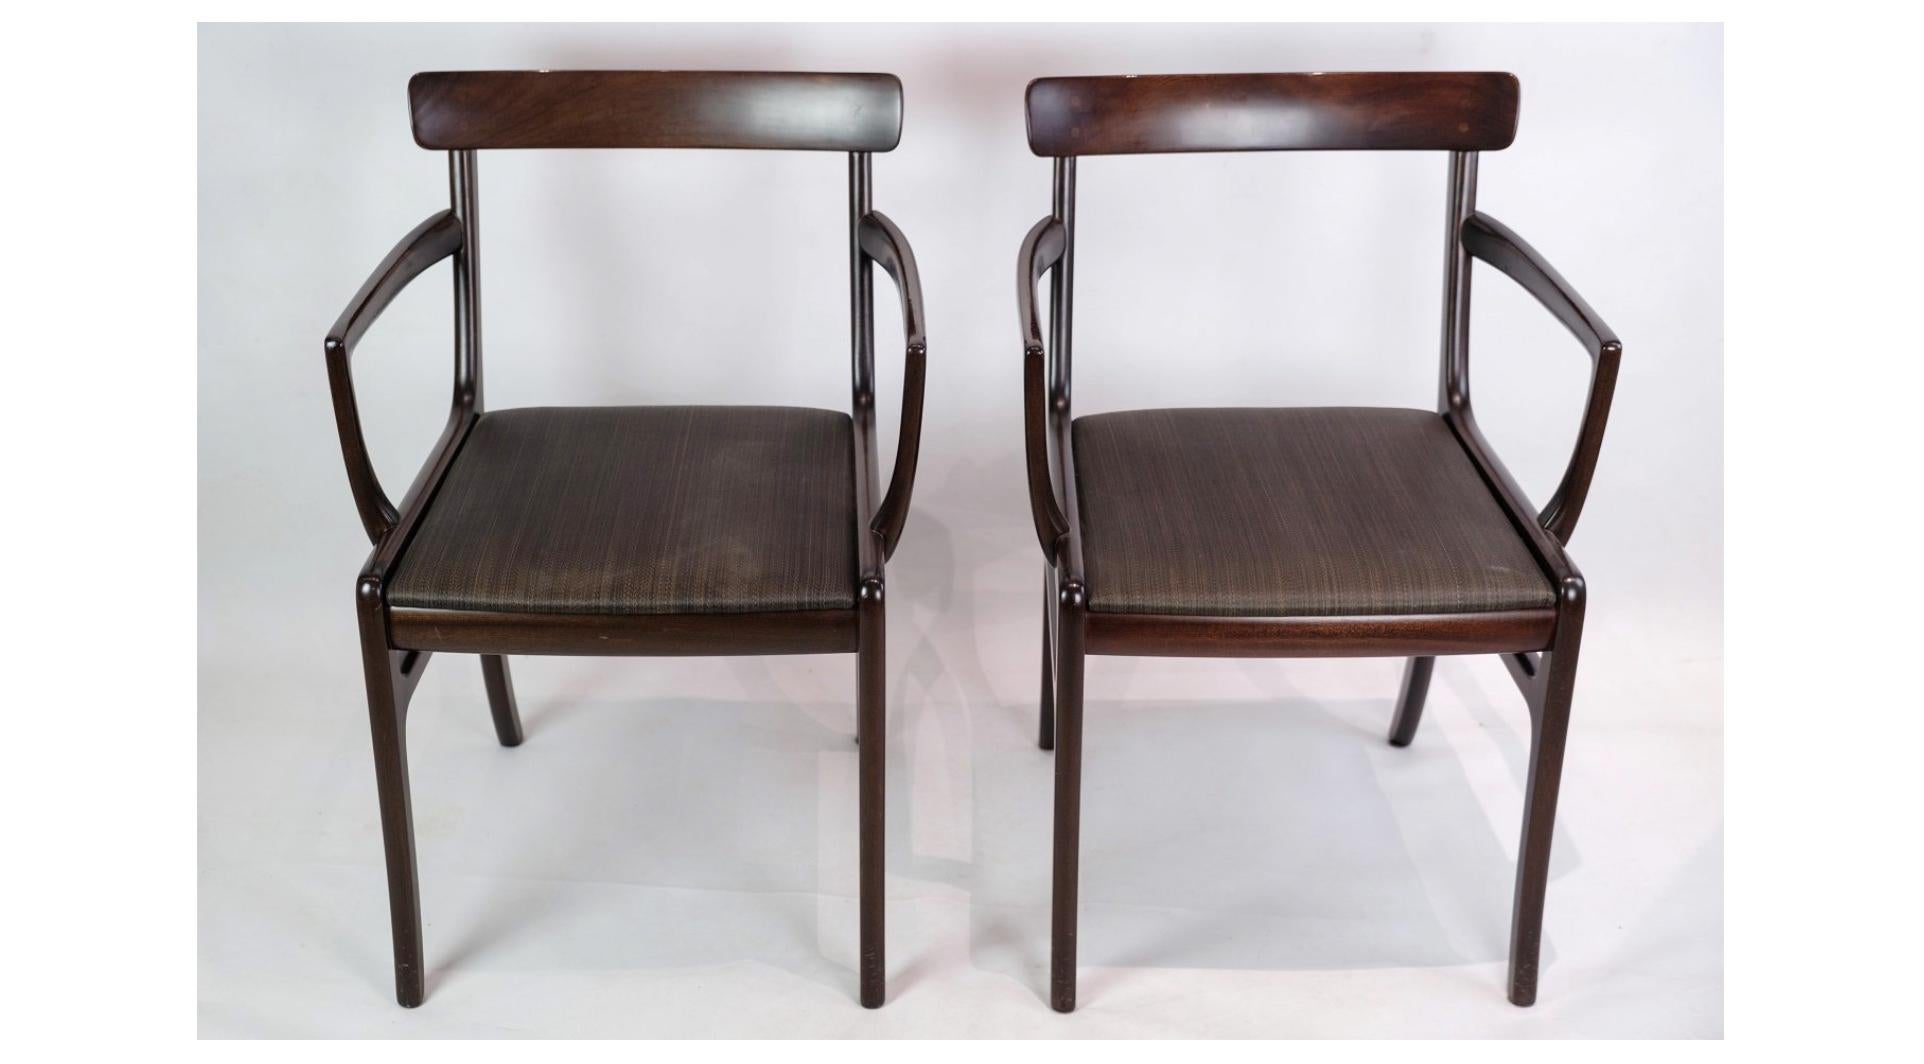 A pair of Rungstedlund armchairs, made of mahogany and covered in black leather, is a brilliant example of Ole Wanscher's timeless design, combining aesthetics and functionality in a sublime way.

Ole Wanscher, one of the most important Danish